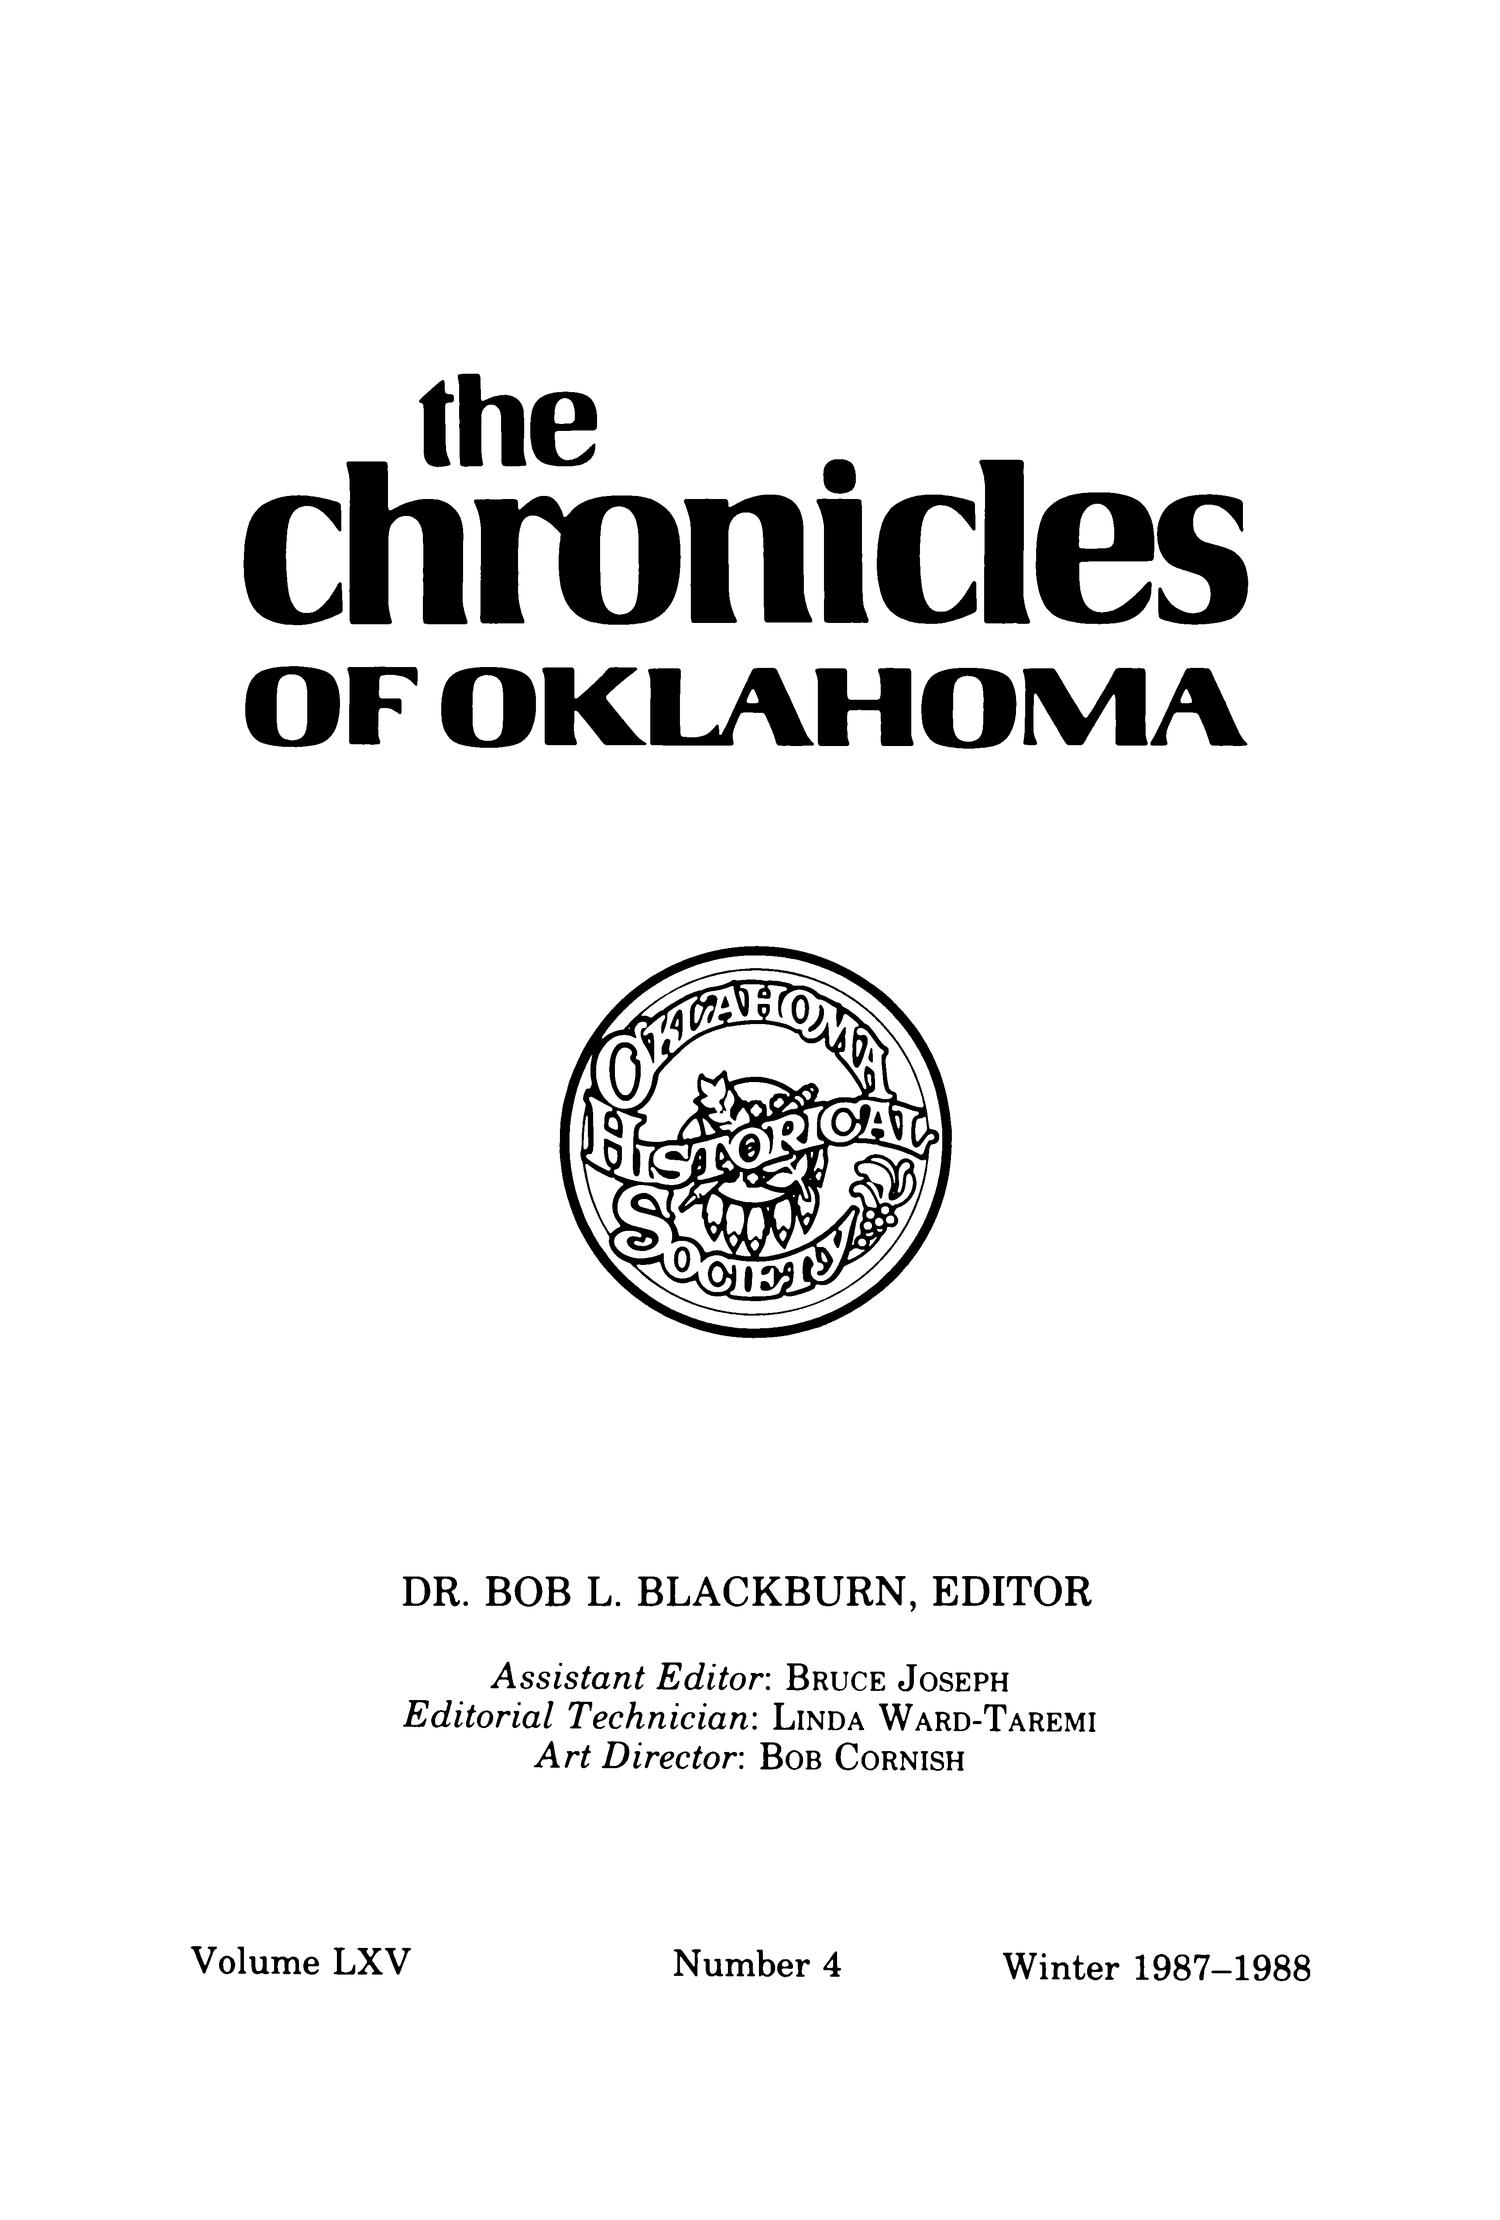 Chronicles of Oklahoma, Volume 65, Number 4, Winter 1987-88
                                                
                                                    337
                                                